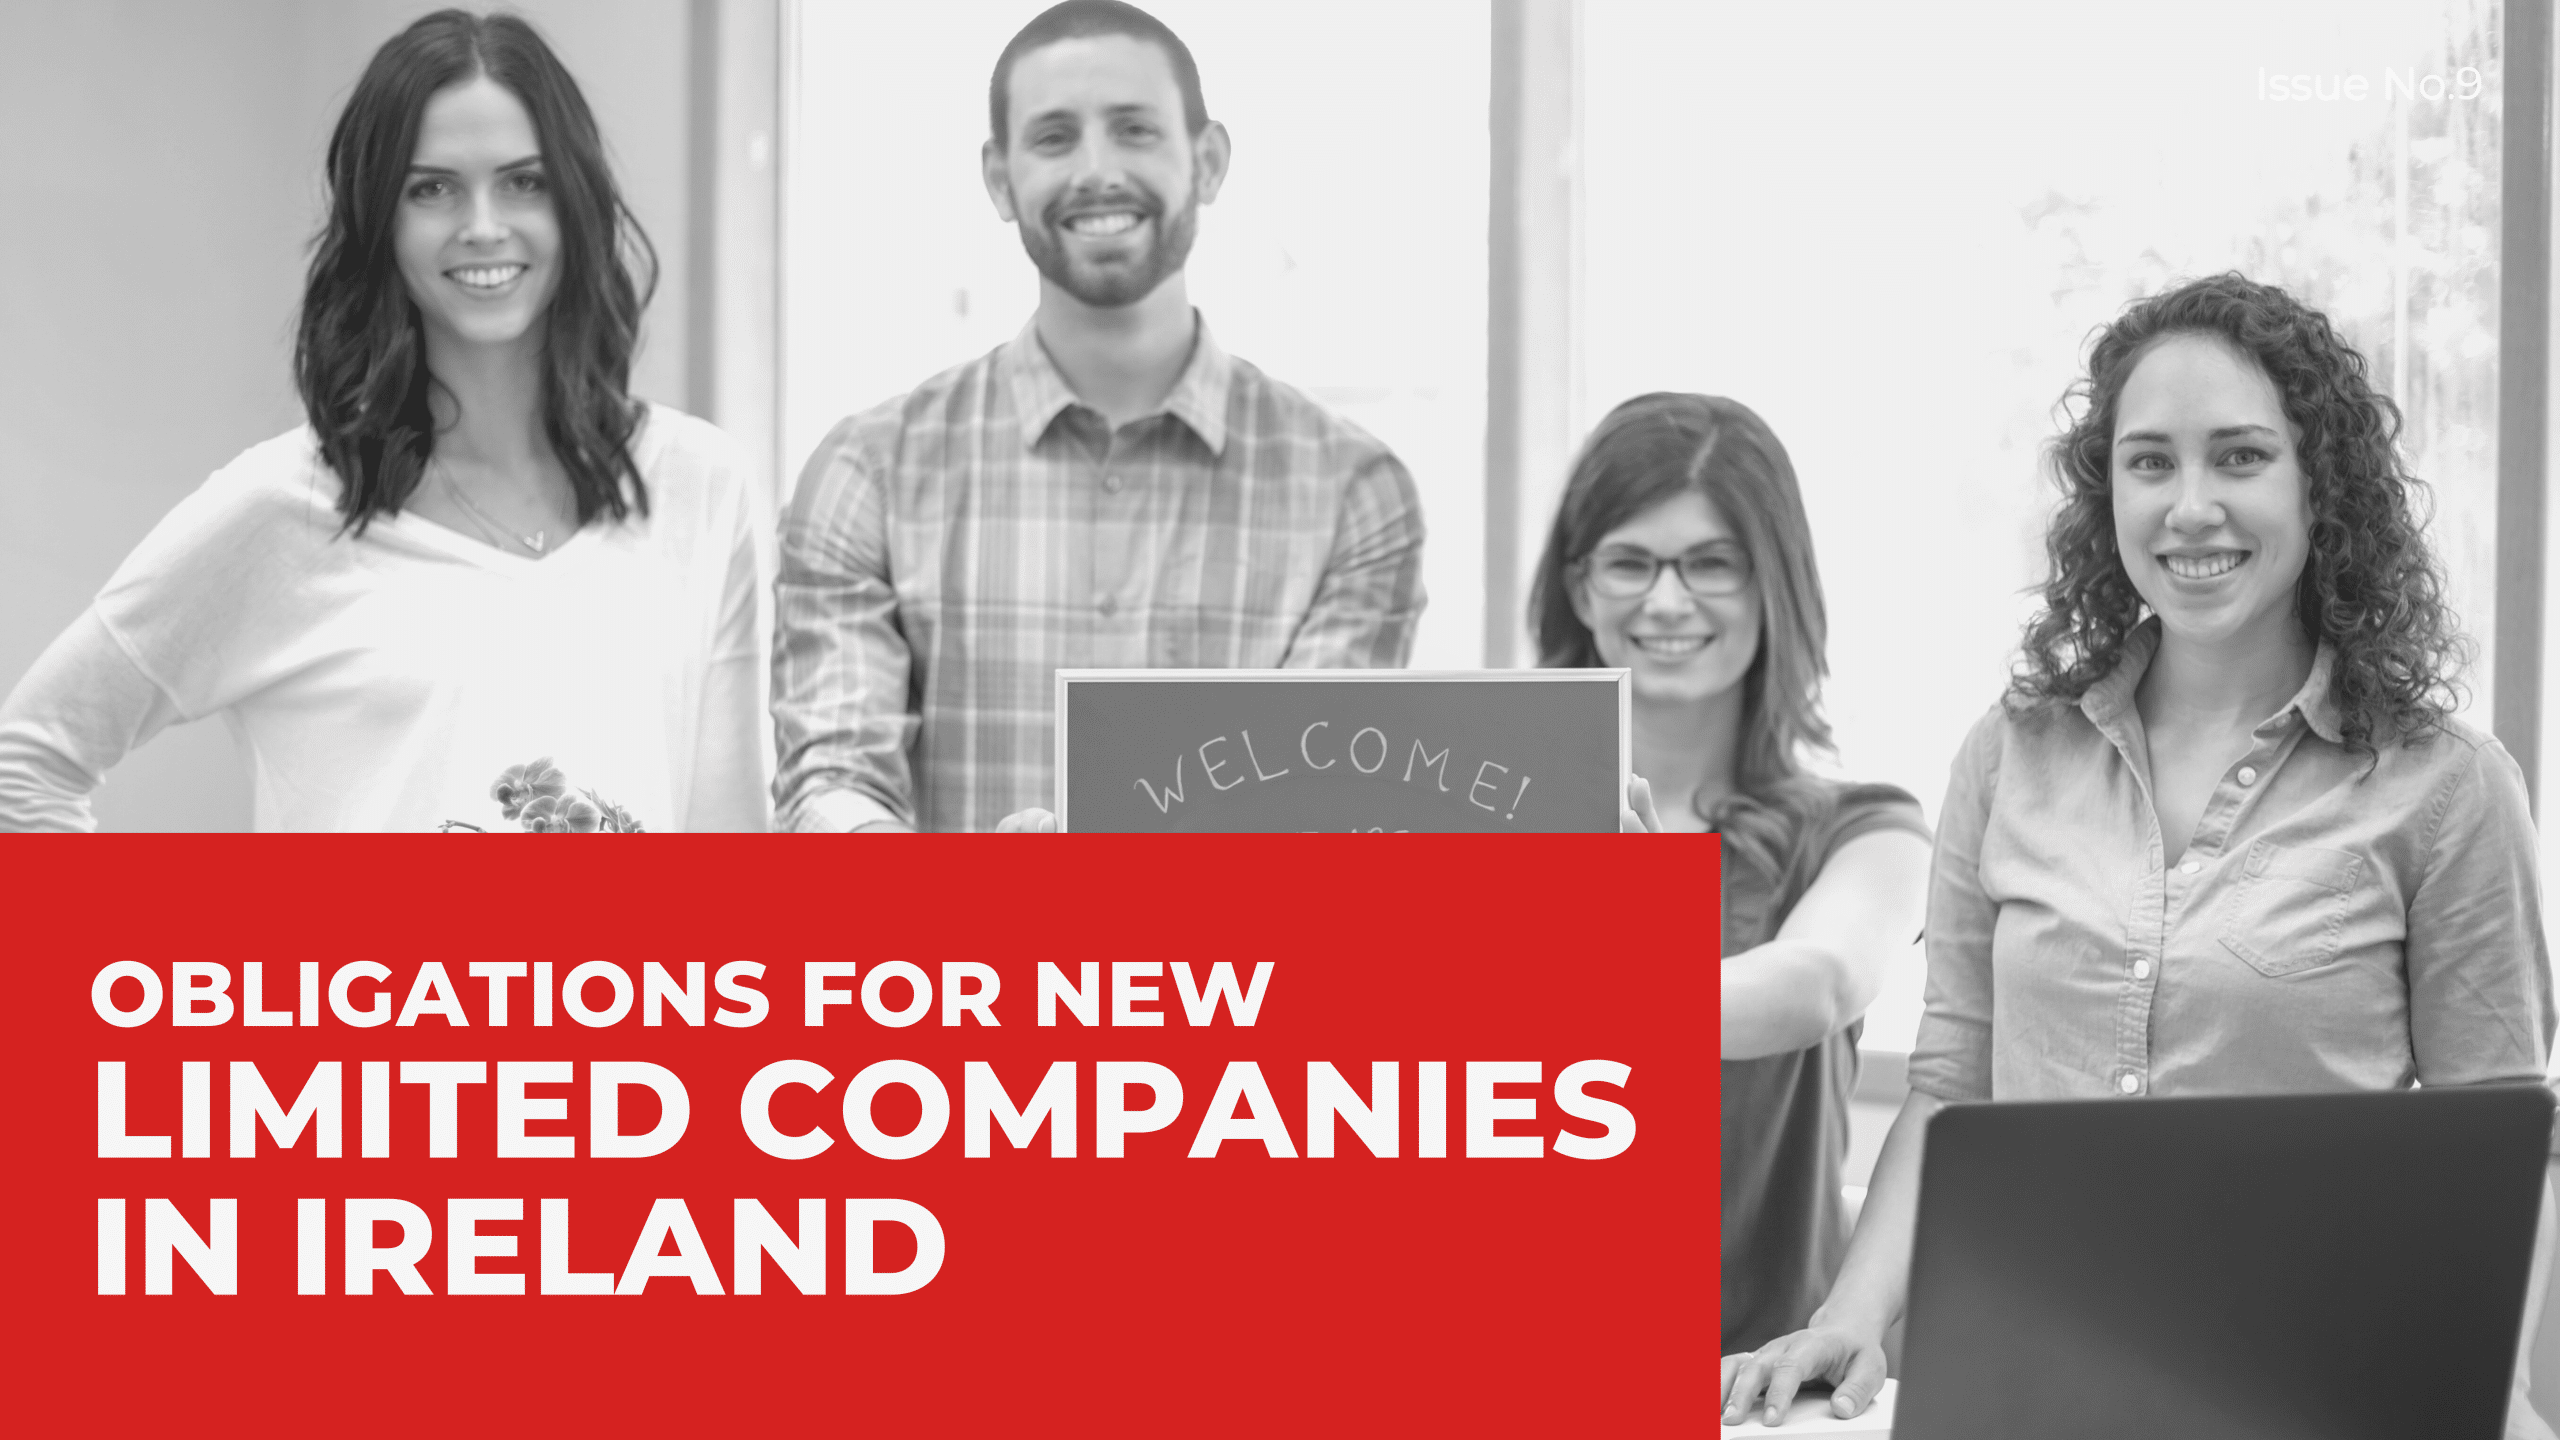 You are currently viewing OBLIGATIONS FOR NEW LIMITED COMPANIES IN IRELAND